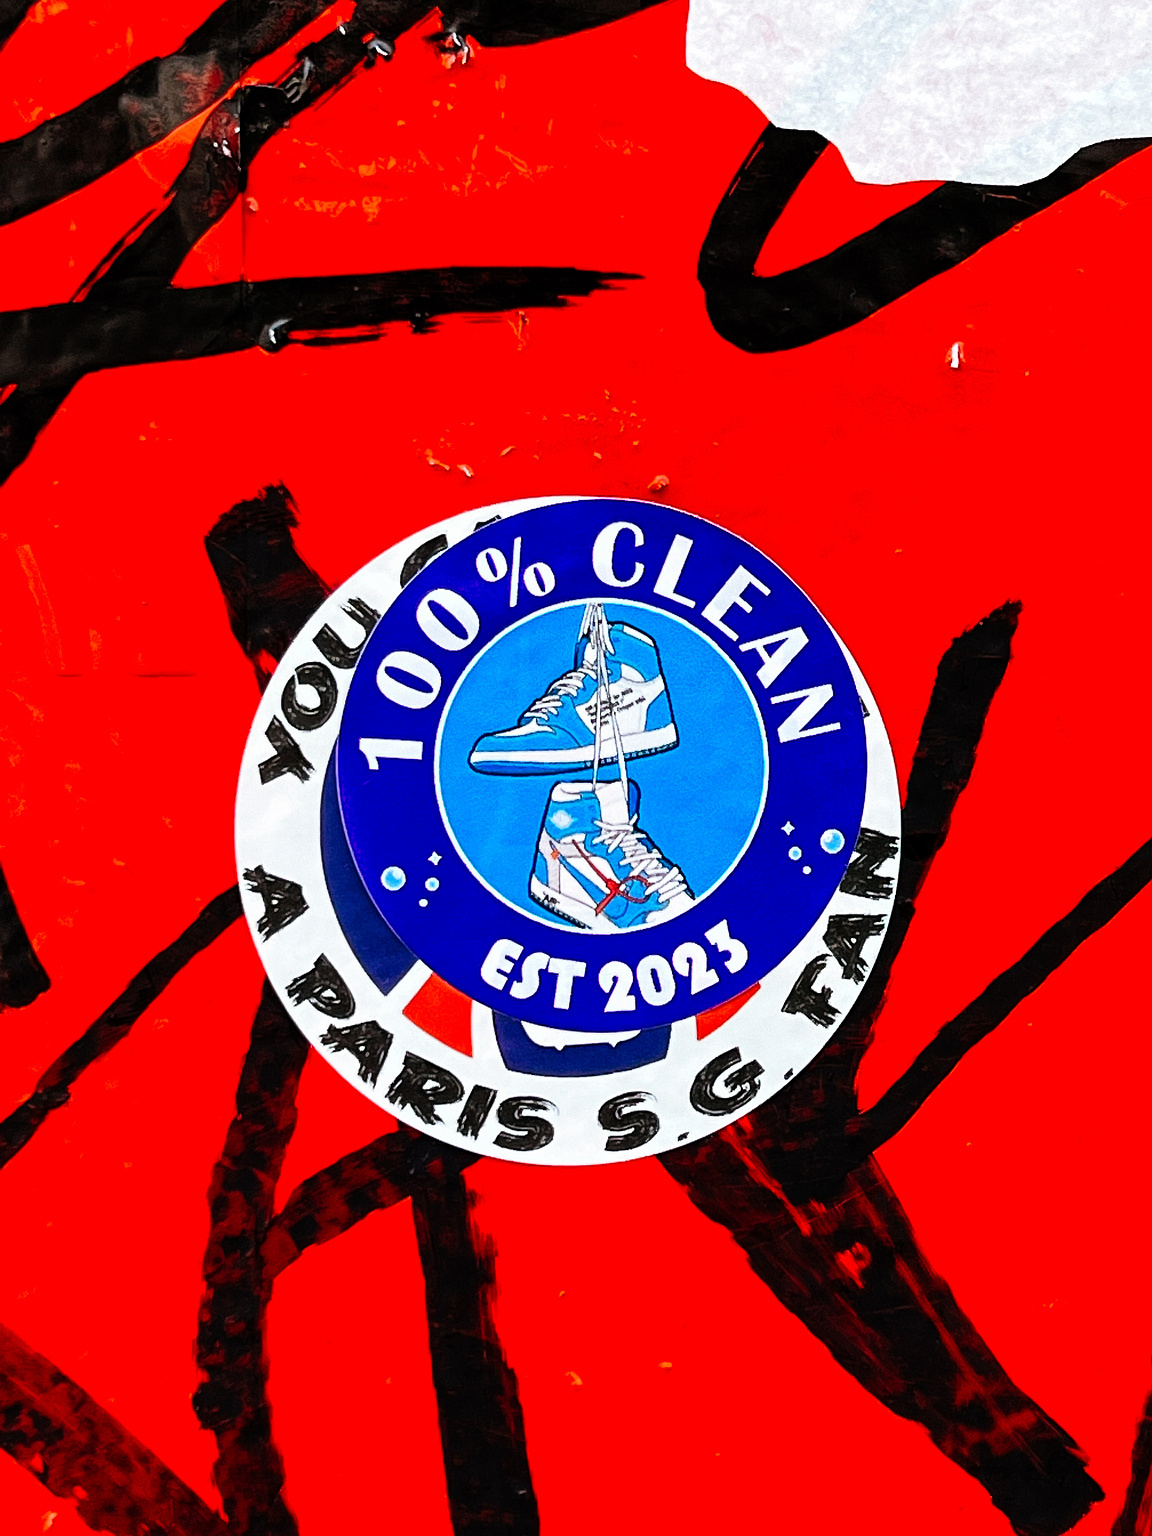 A circular sticker on a red, textured background displays the text "100% CLEAN EST 2023" surrounding an image of a couple of sneakers.